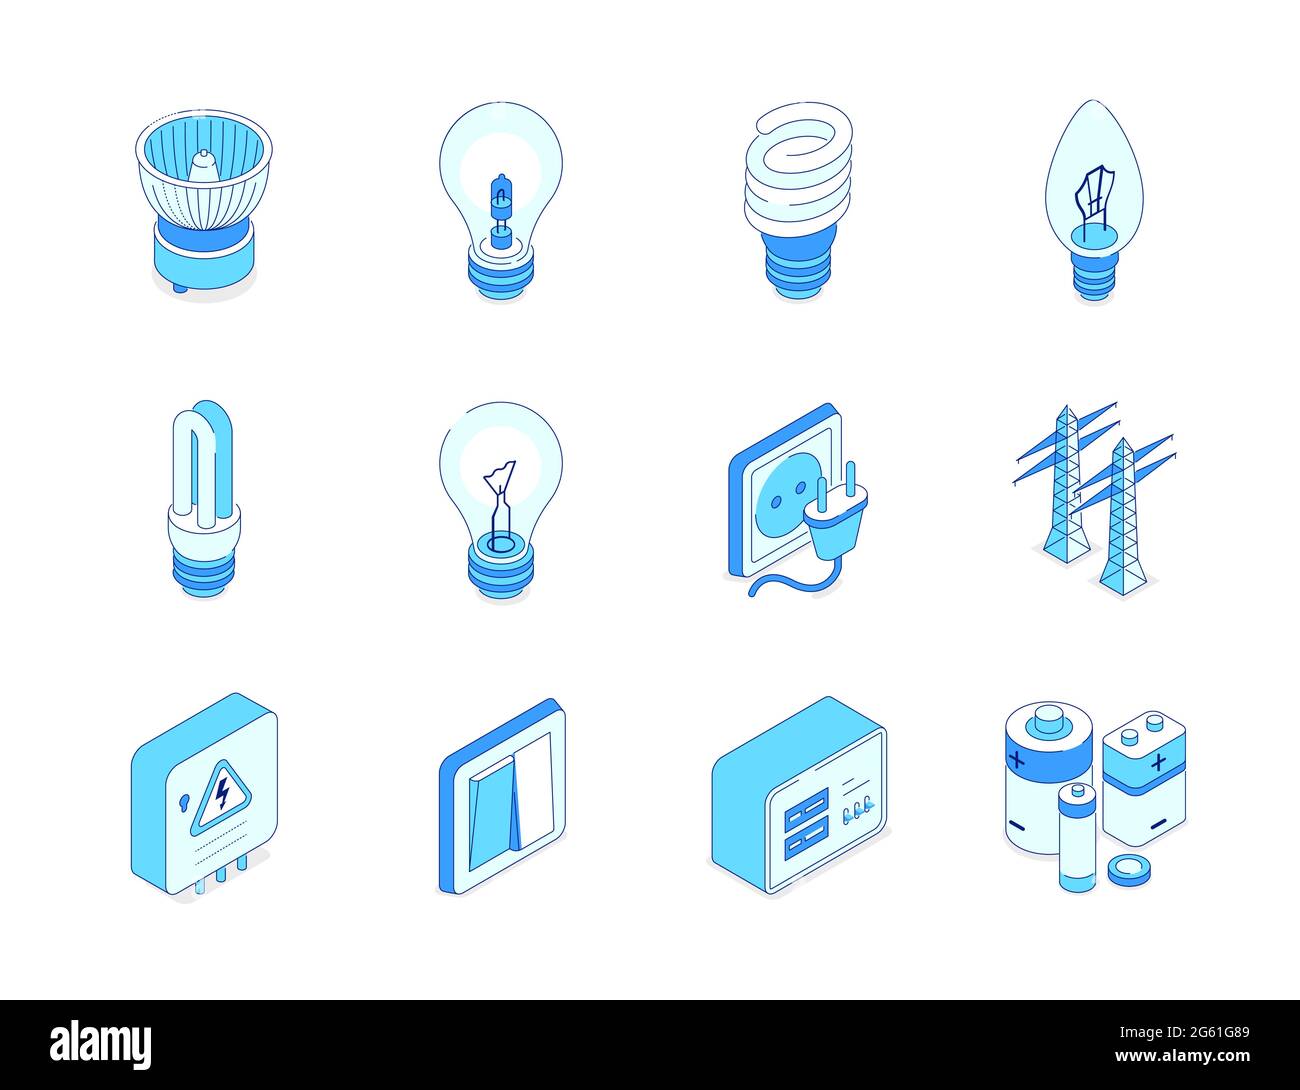 Electrical supplies - modern line isometric icons set. Lighting equipment and electricity idea. Halogen, fluorescent, incandescent lamps, led bulb, pl Stock Vector